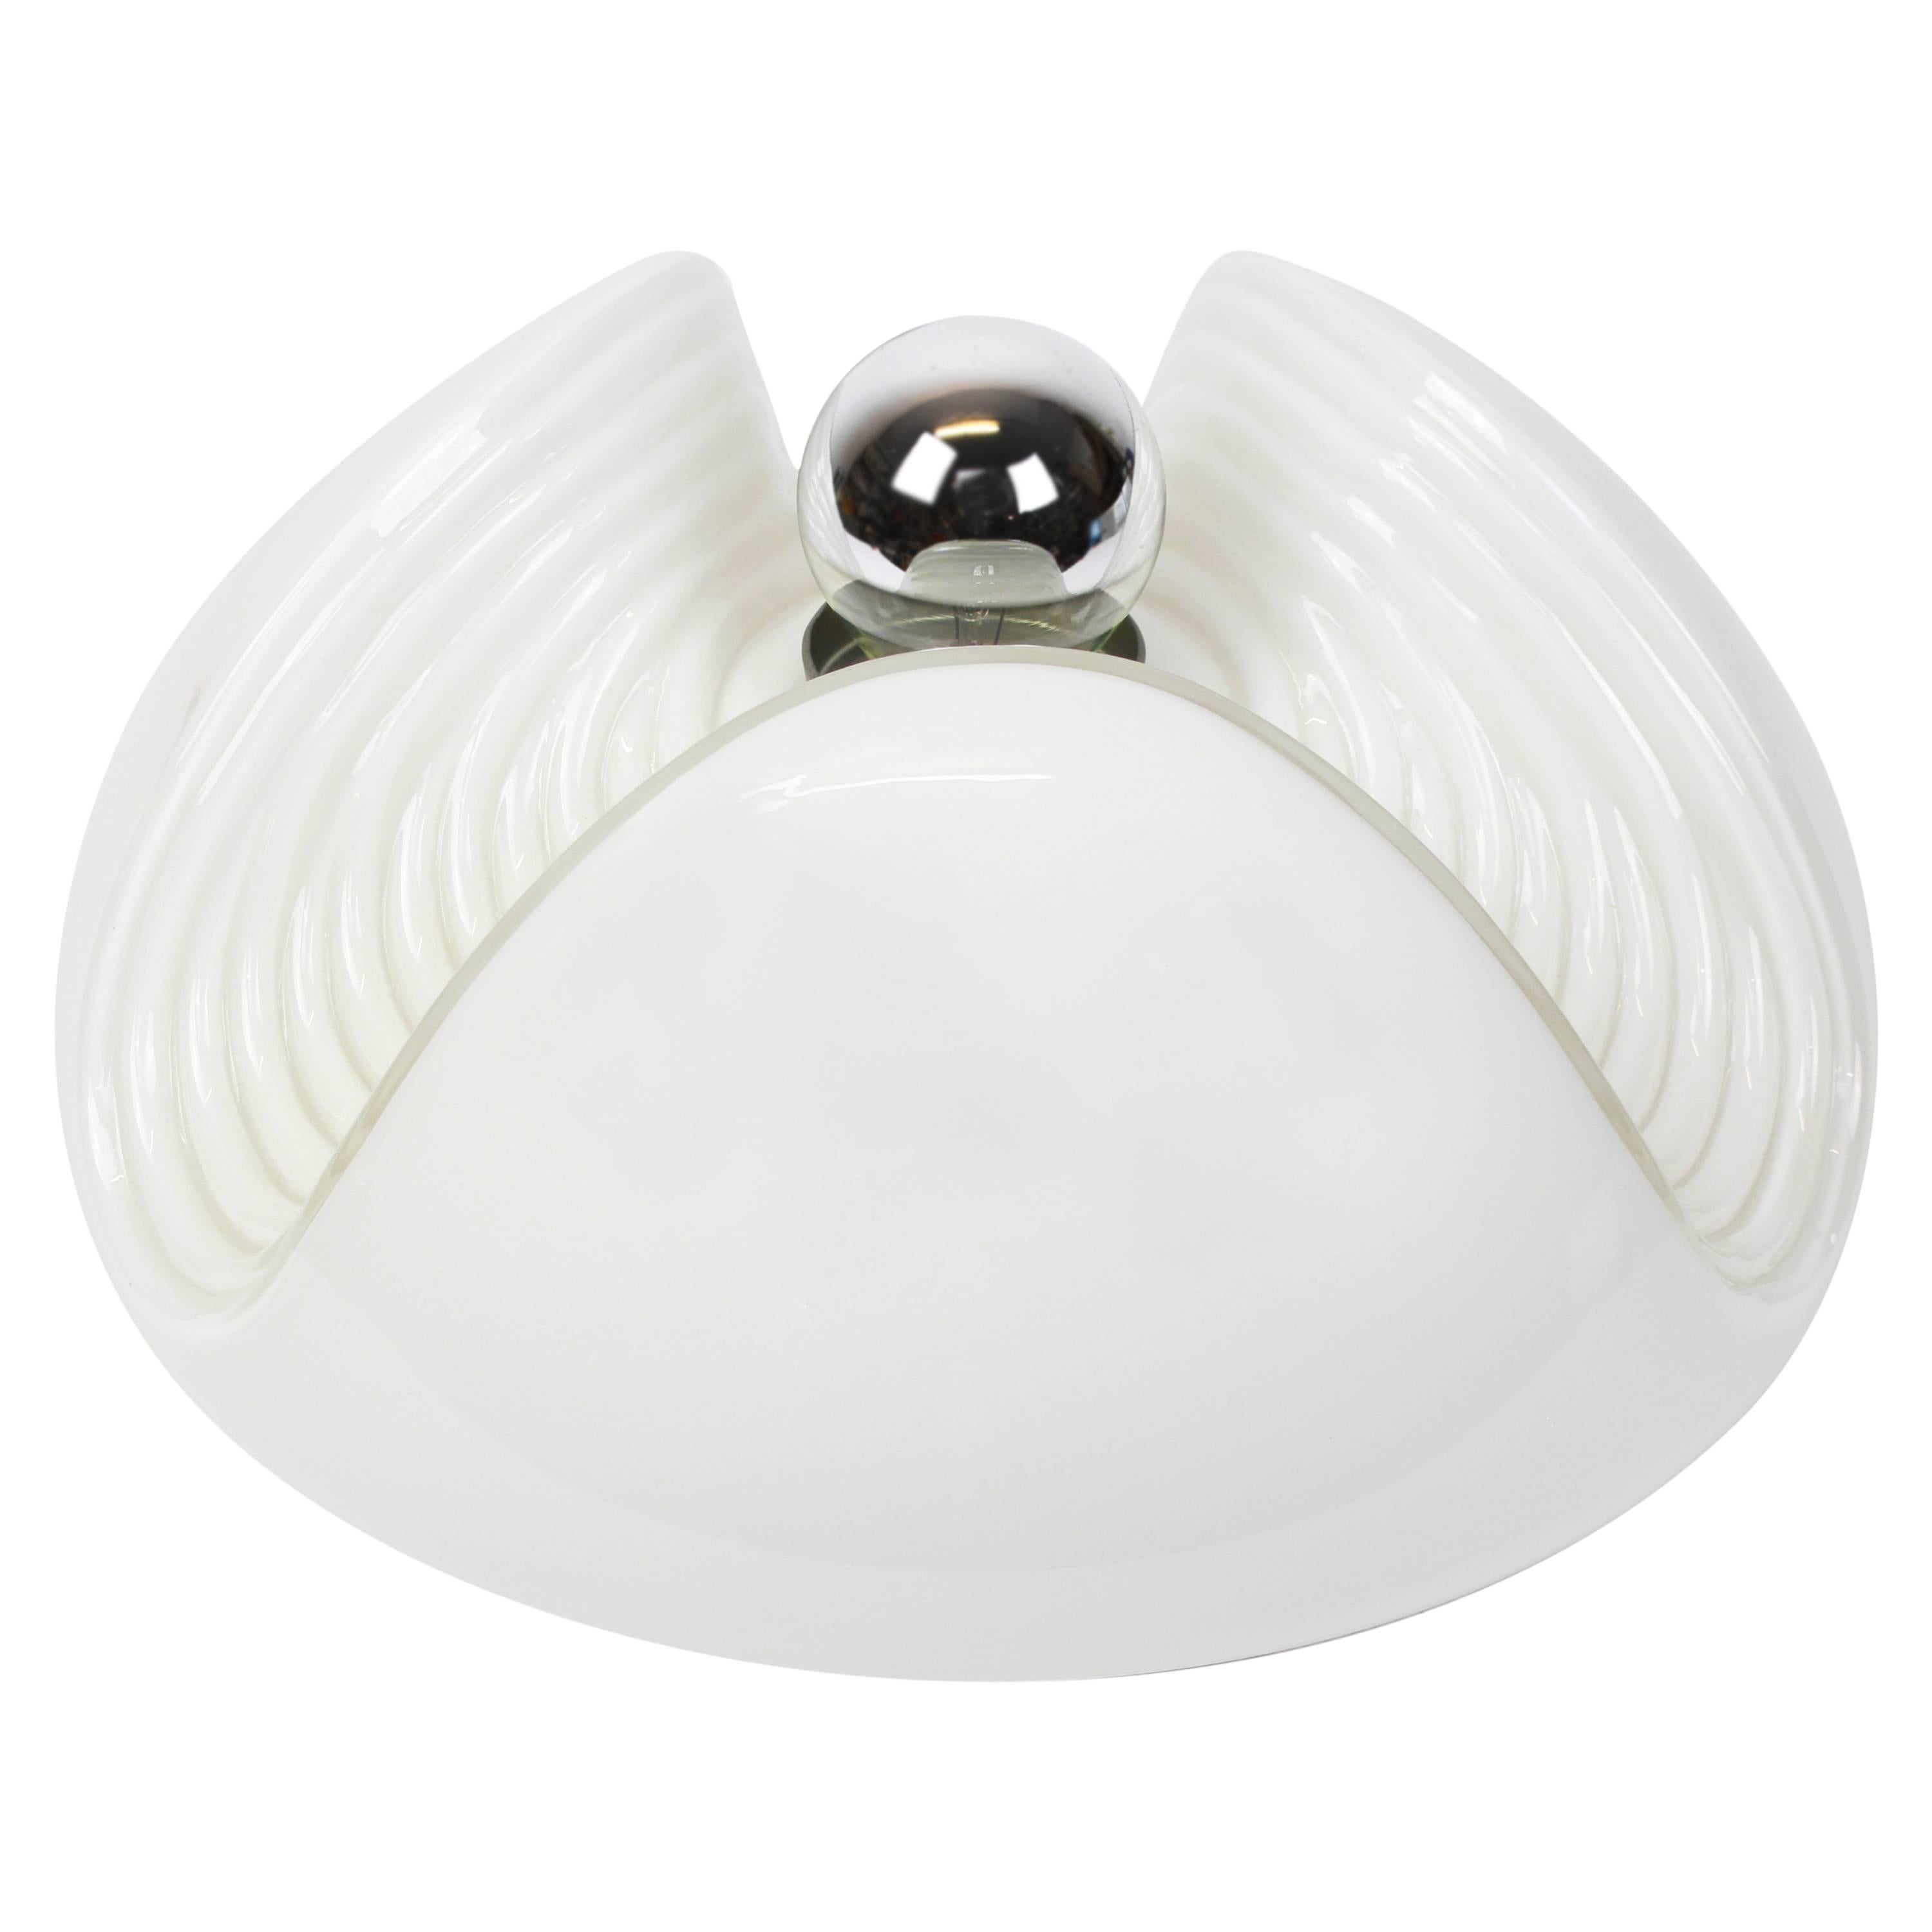 A special round biomorphic white glass wall sconce or flush mount designed by Koch & Lowy for Peill & Putzler, manufactured in Germany, circa the 1970s.

High quality and in very good condition. Cleaned, well-wired and ready to use. 

Each fixture